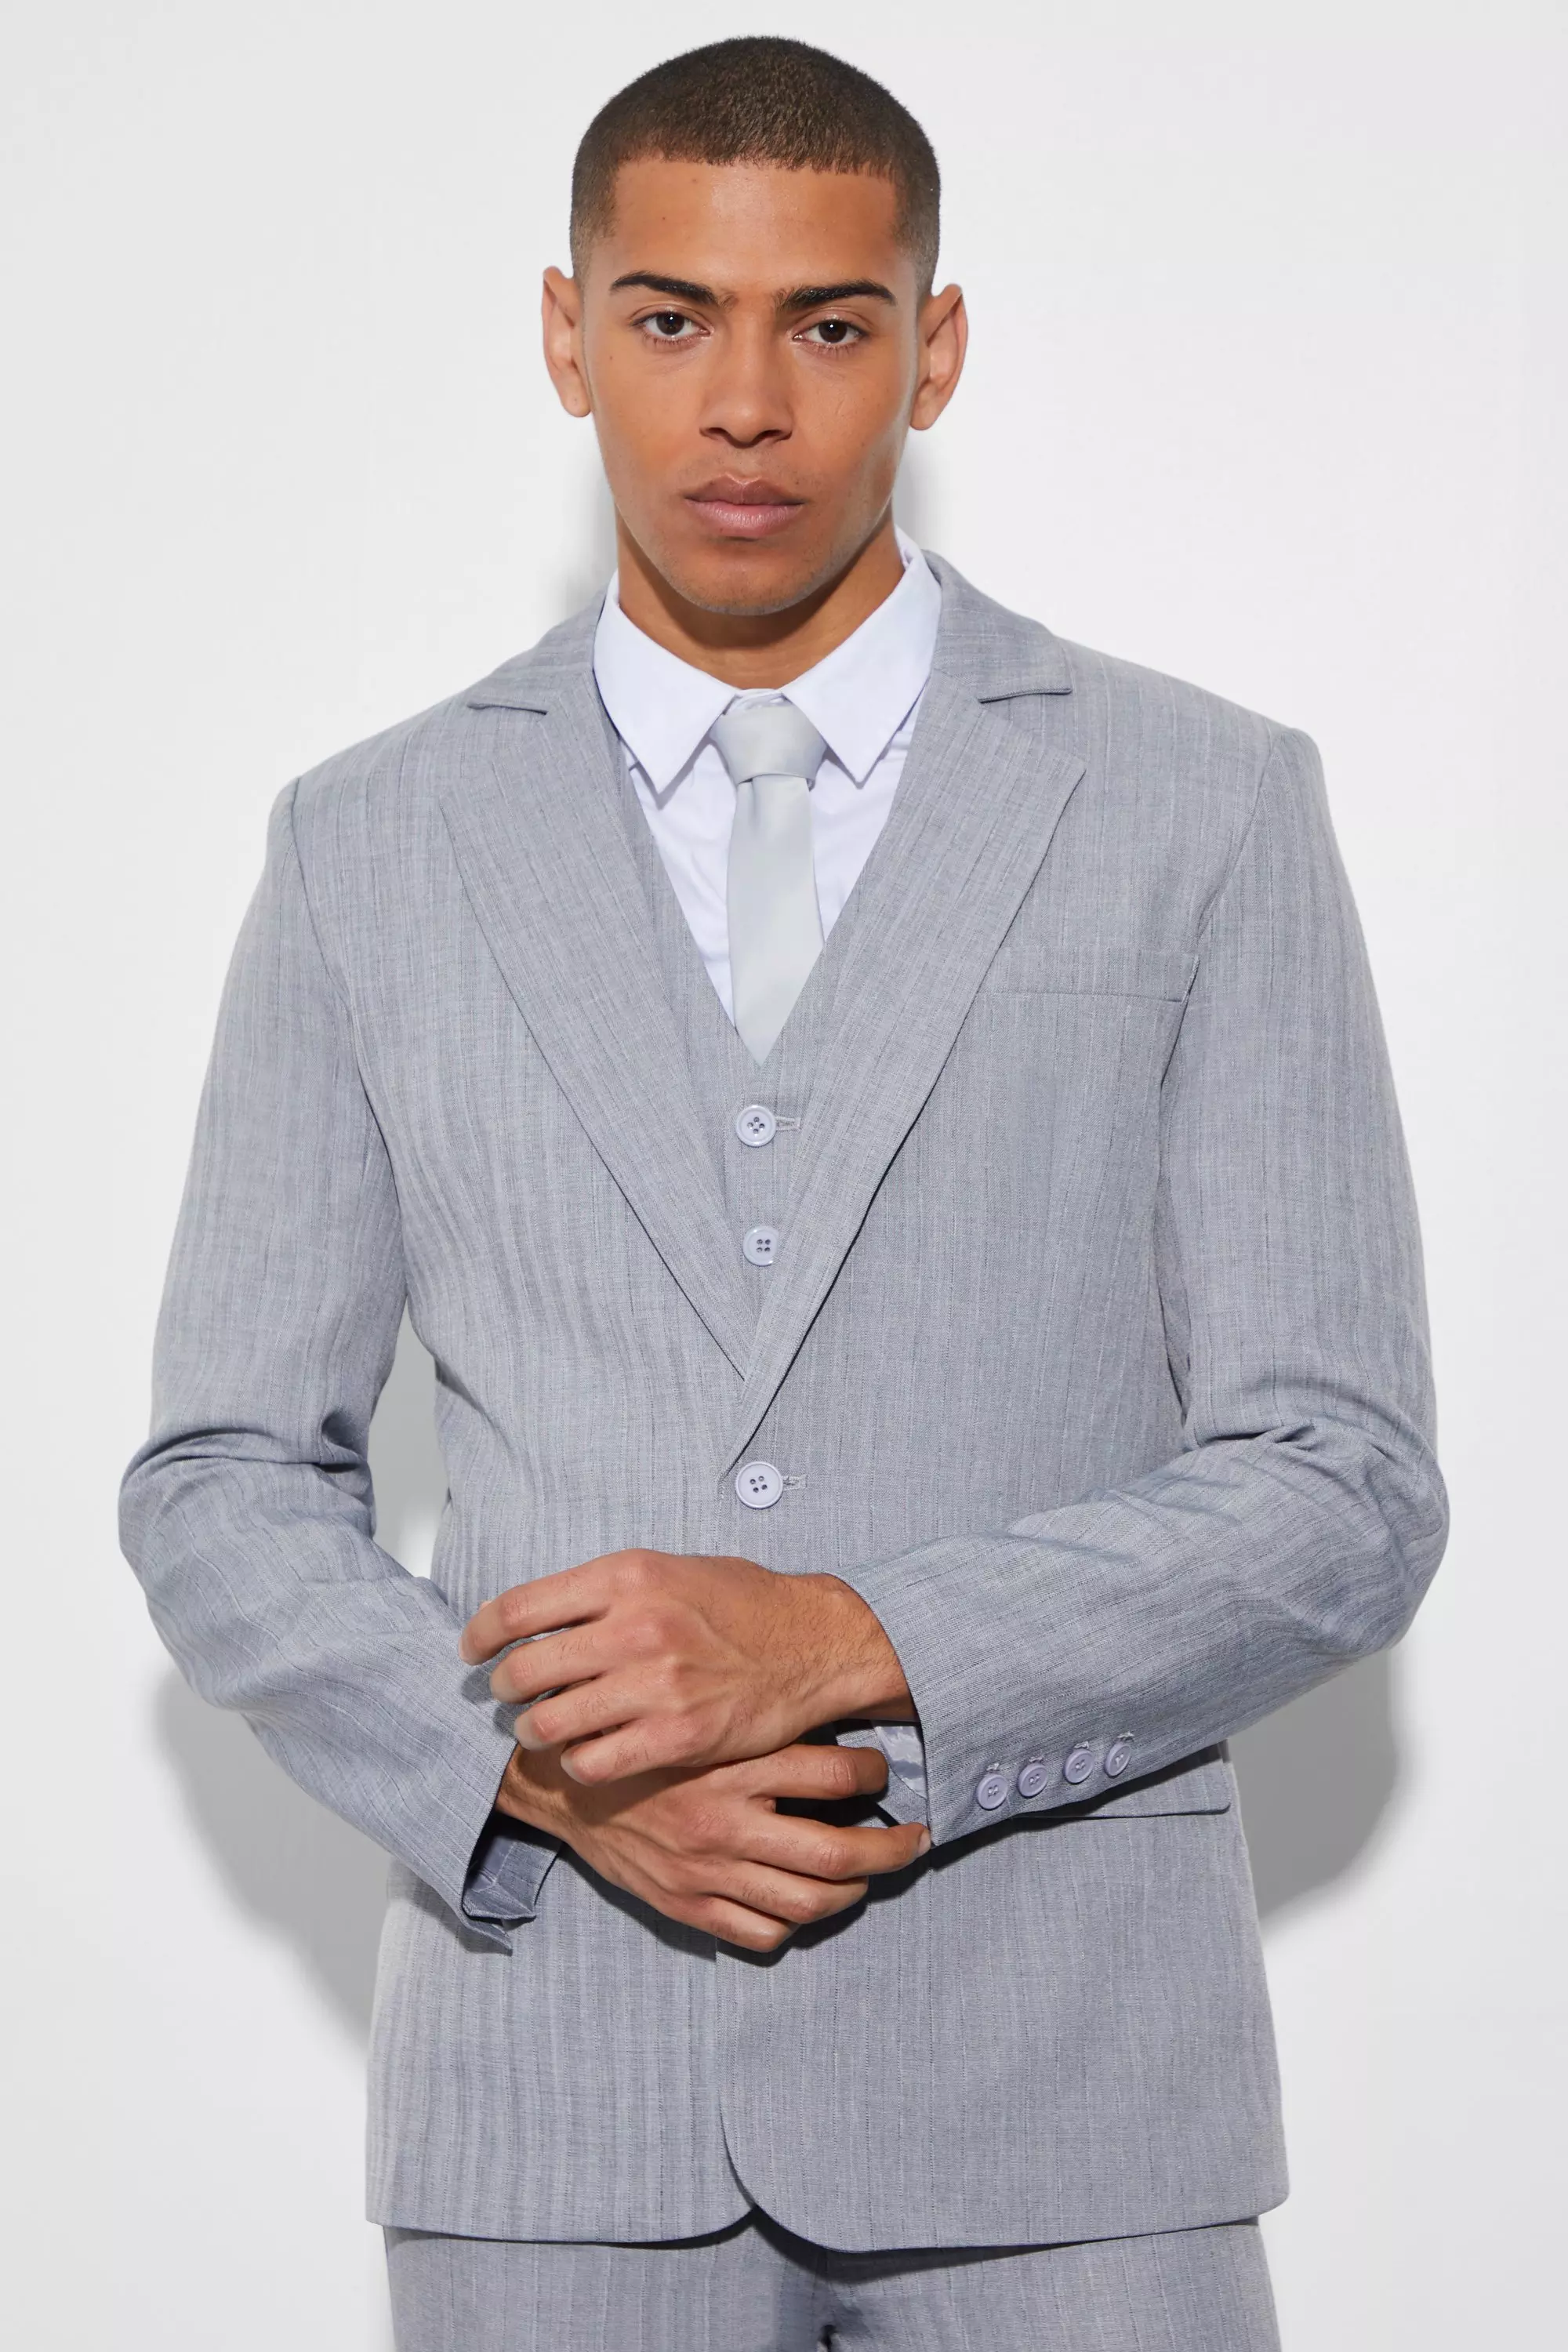 Skinny Single Breasted Textured Suit Jacket Navy